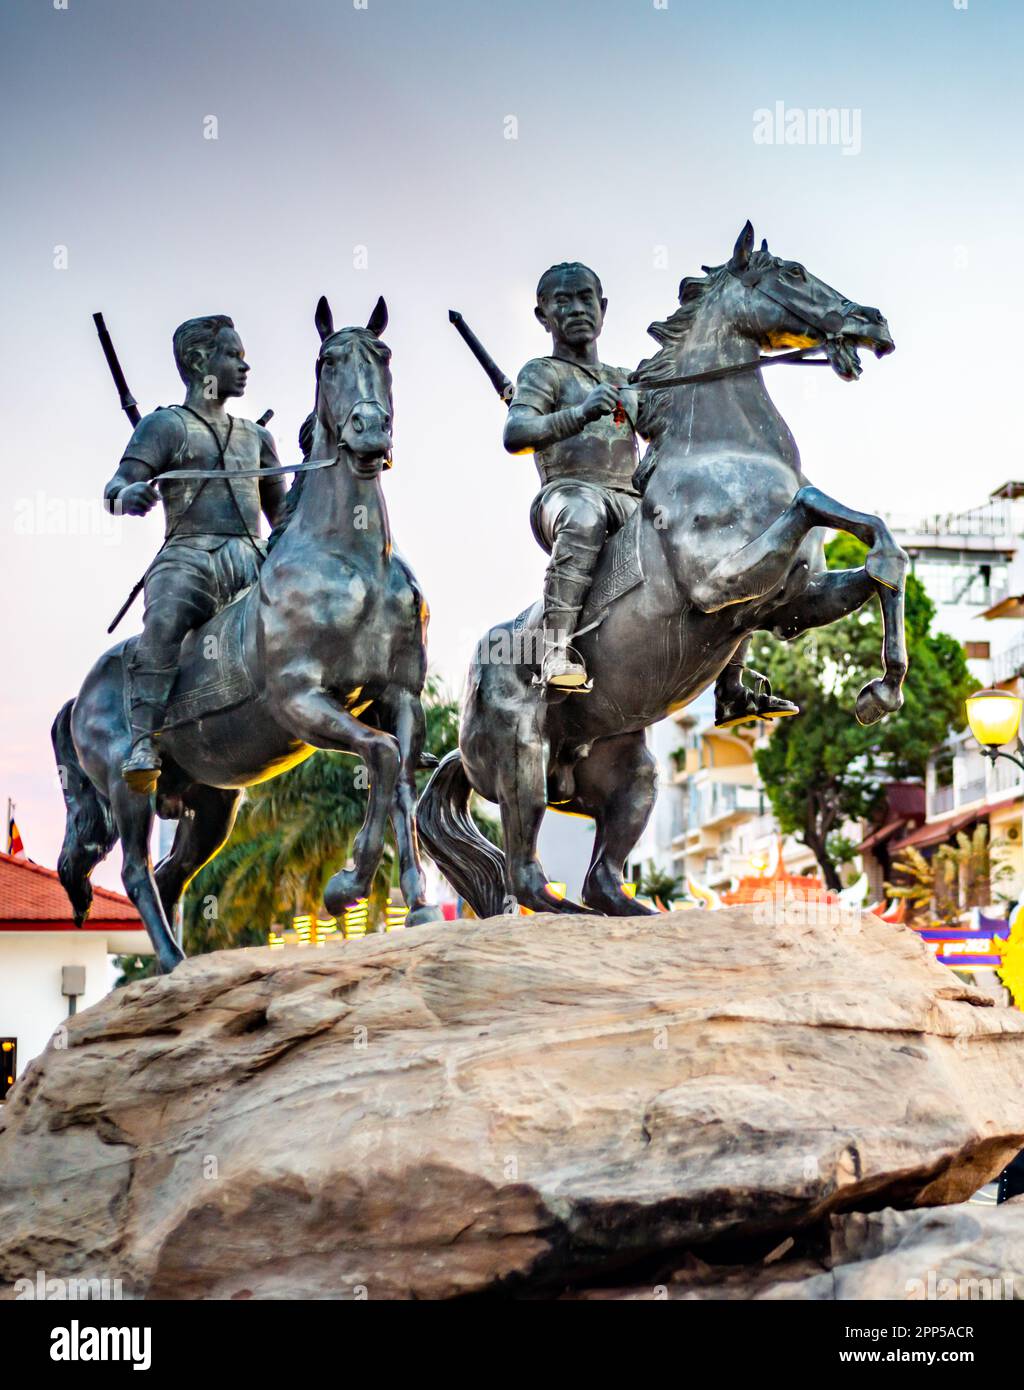 Phnom Penh,Cambodia-January 4th 2023:Mounted on a large rock,along the Riverside walk.A depiction of two heroic,historic Khmer warriors,on horseback r Stock Photo